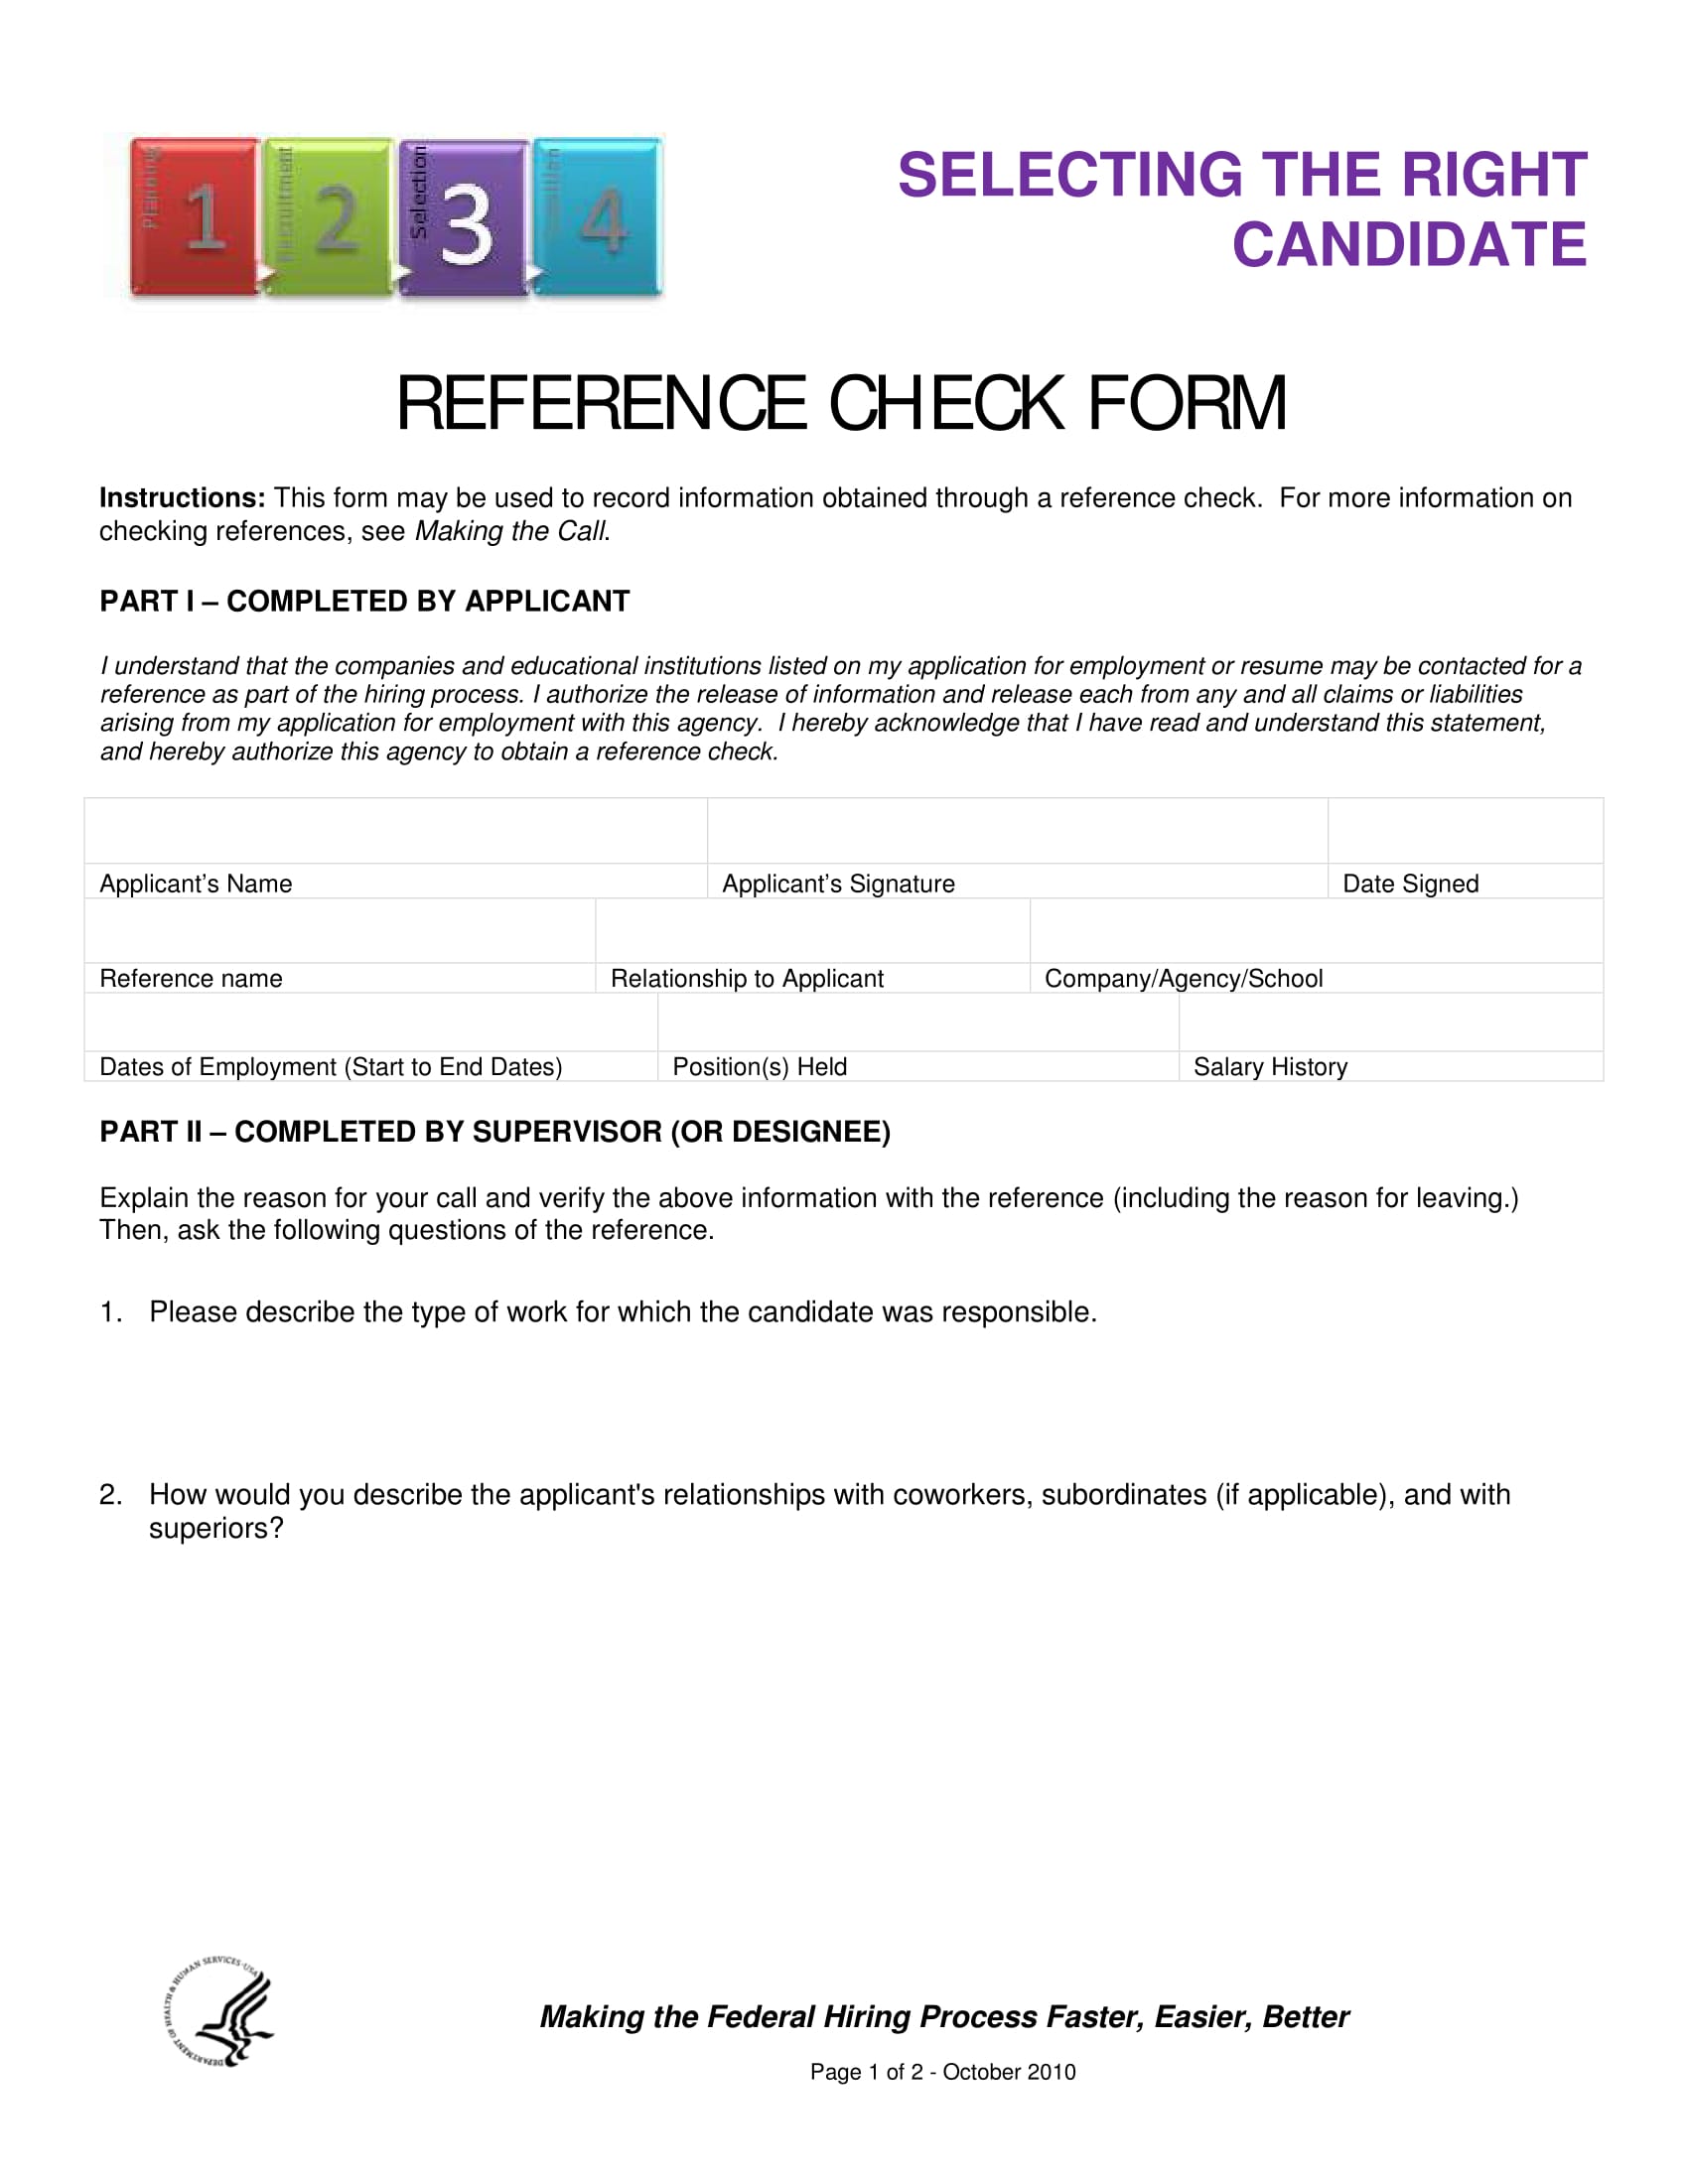 candidate selection reference check form 1